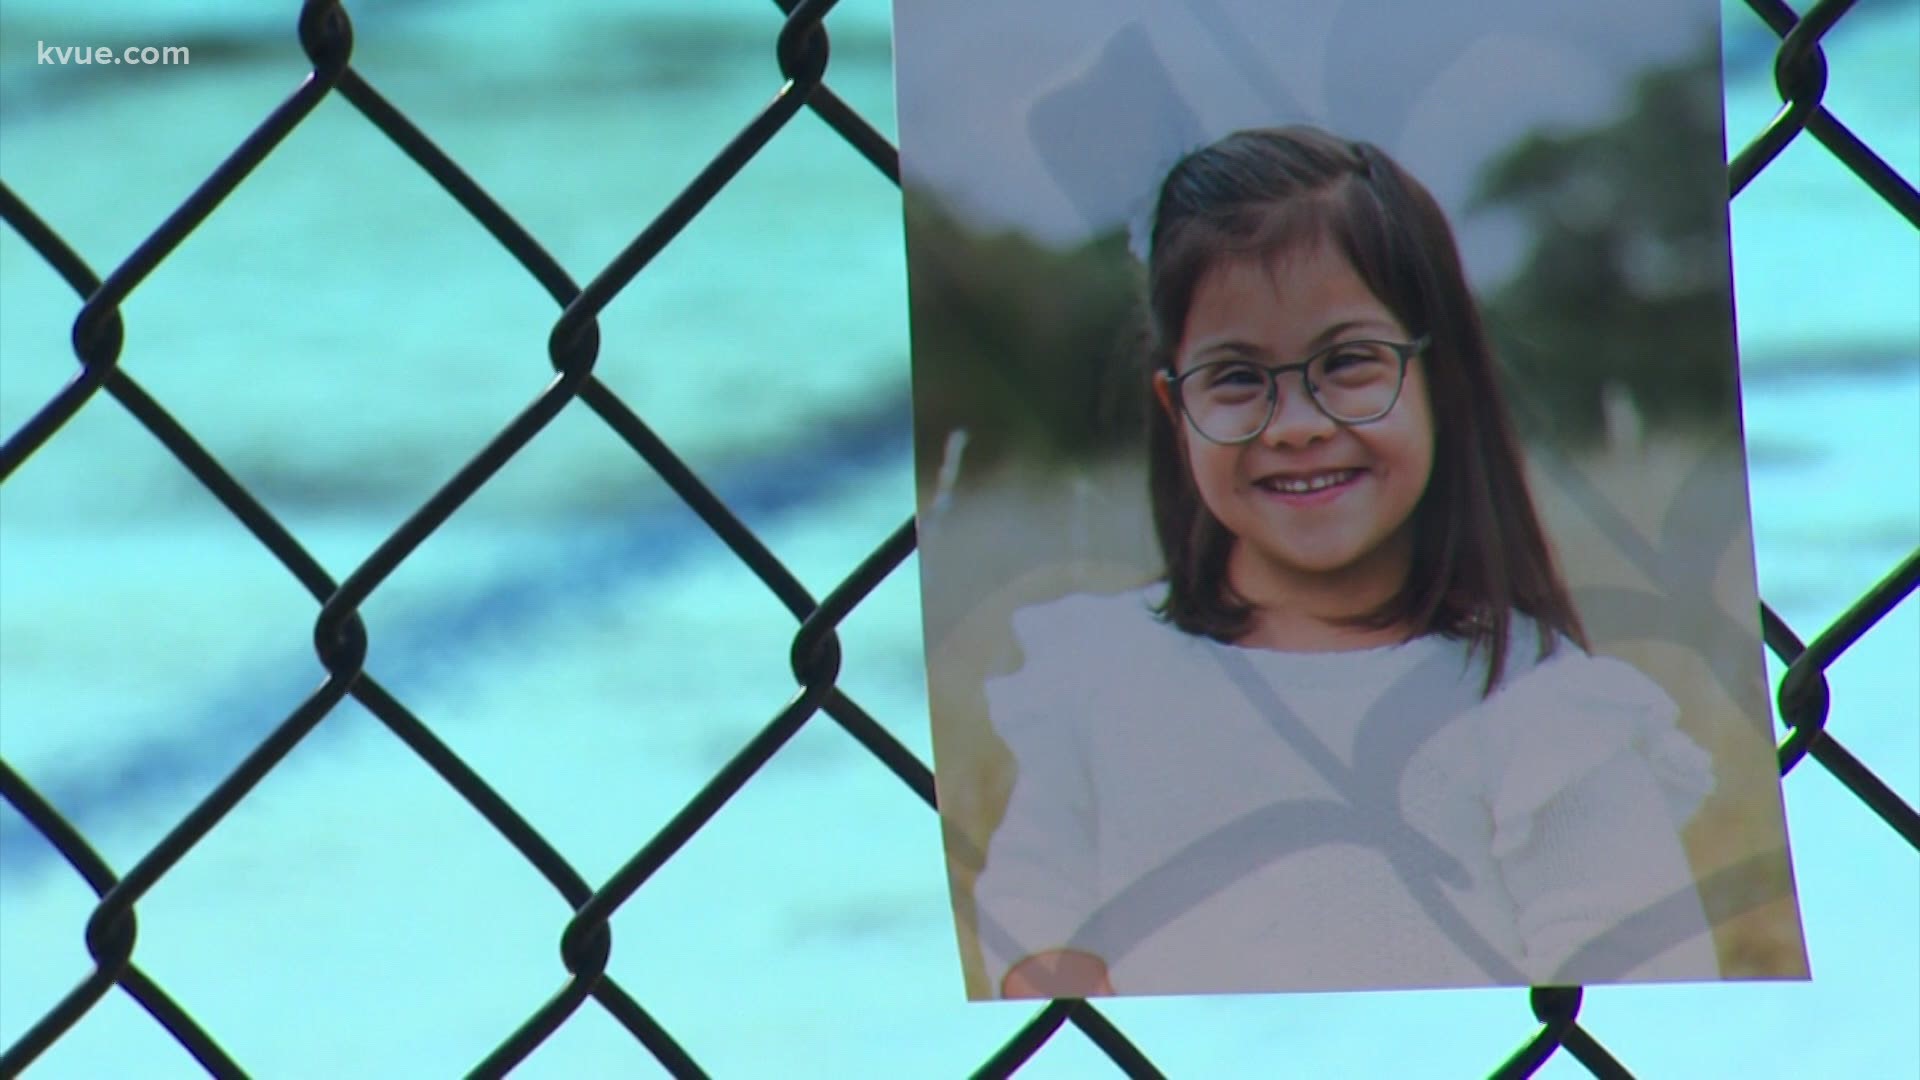 In June 2019, six-year-old Cati DeLaPeña died after summer camp workers found her at the bottom of a Cedar Park swimming pool.